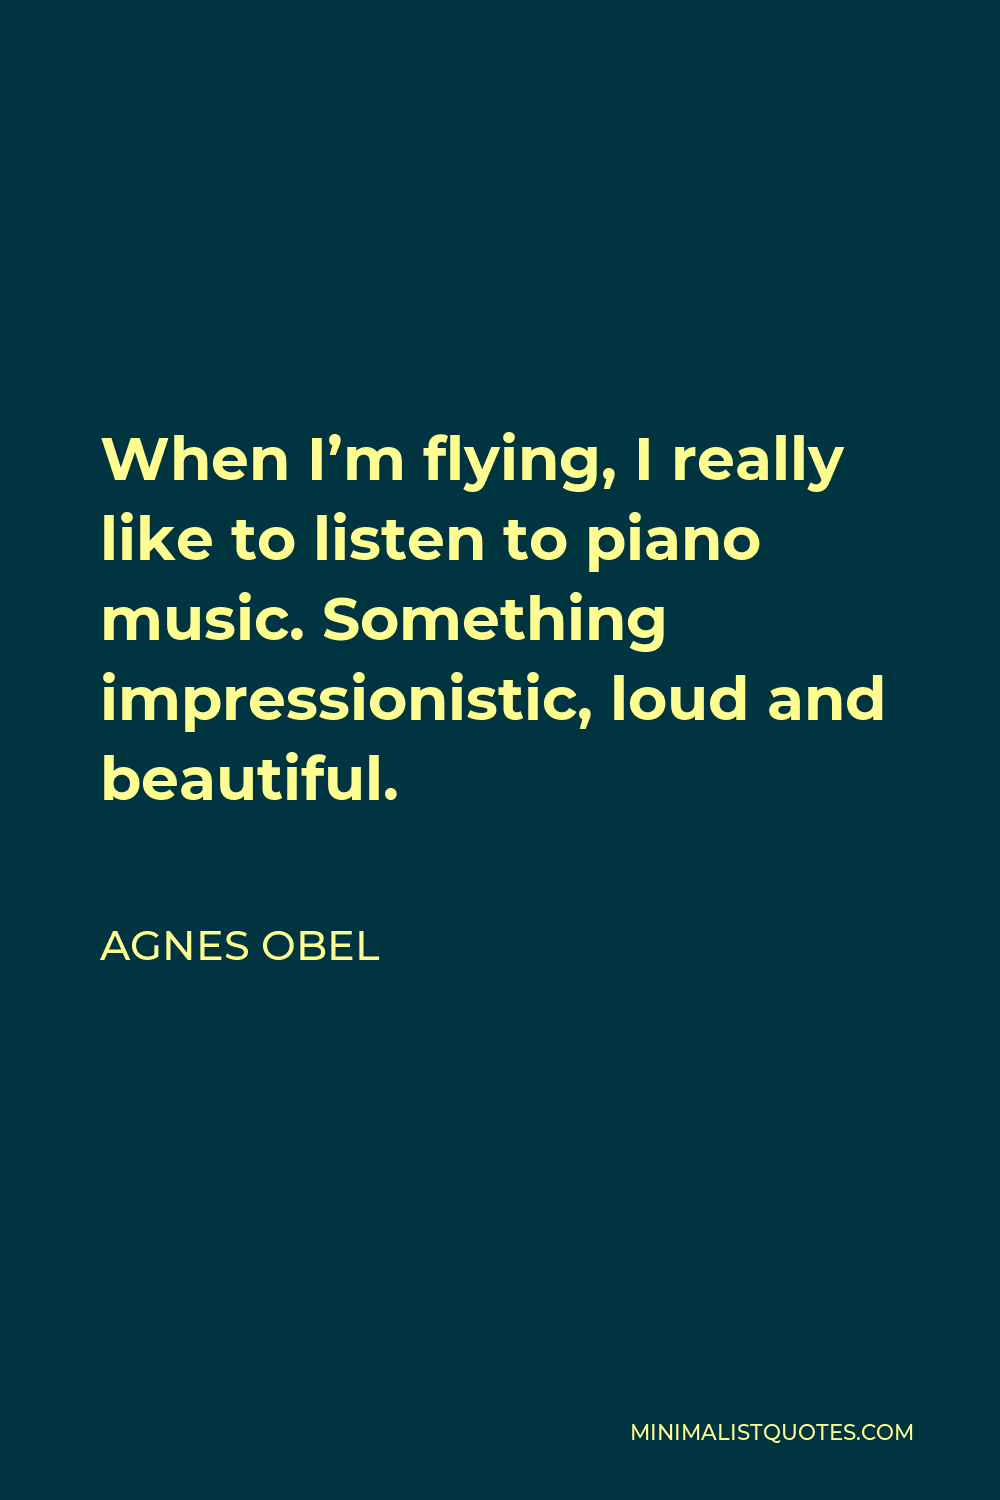 Agnes Obel Quote - When I’m flying, I really like to listen to piano music. Something impressionistic, loud and beautiful.